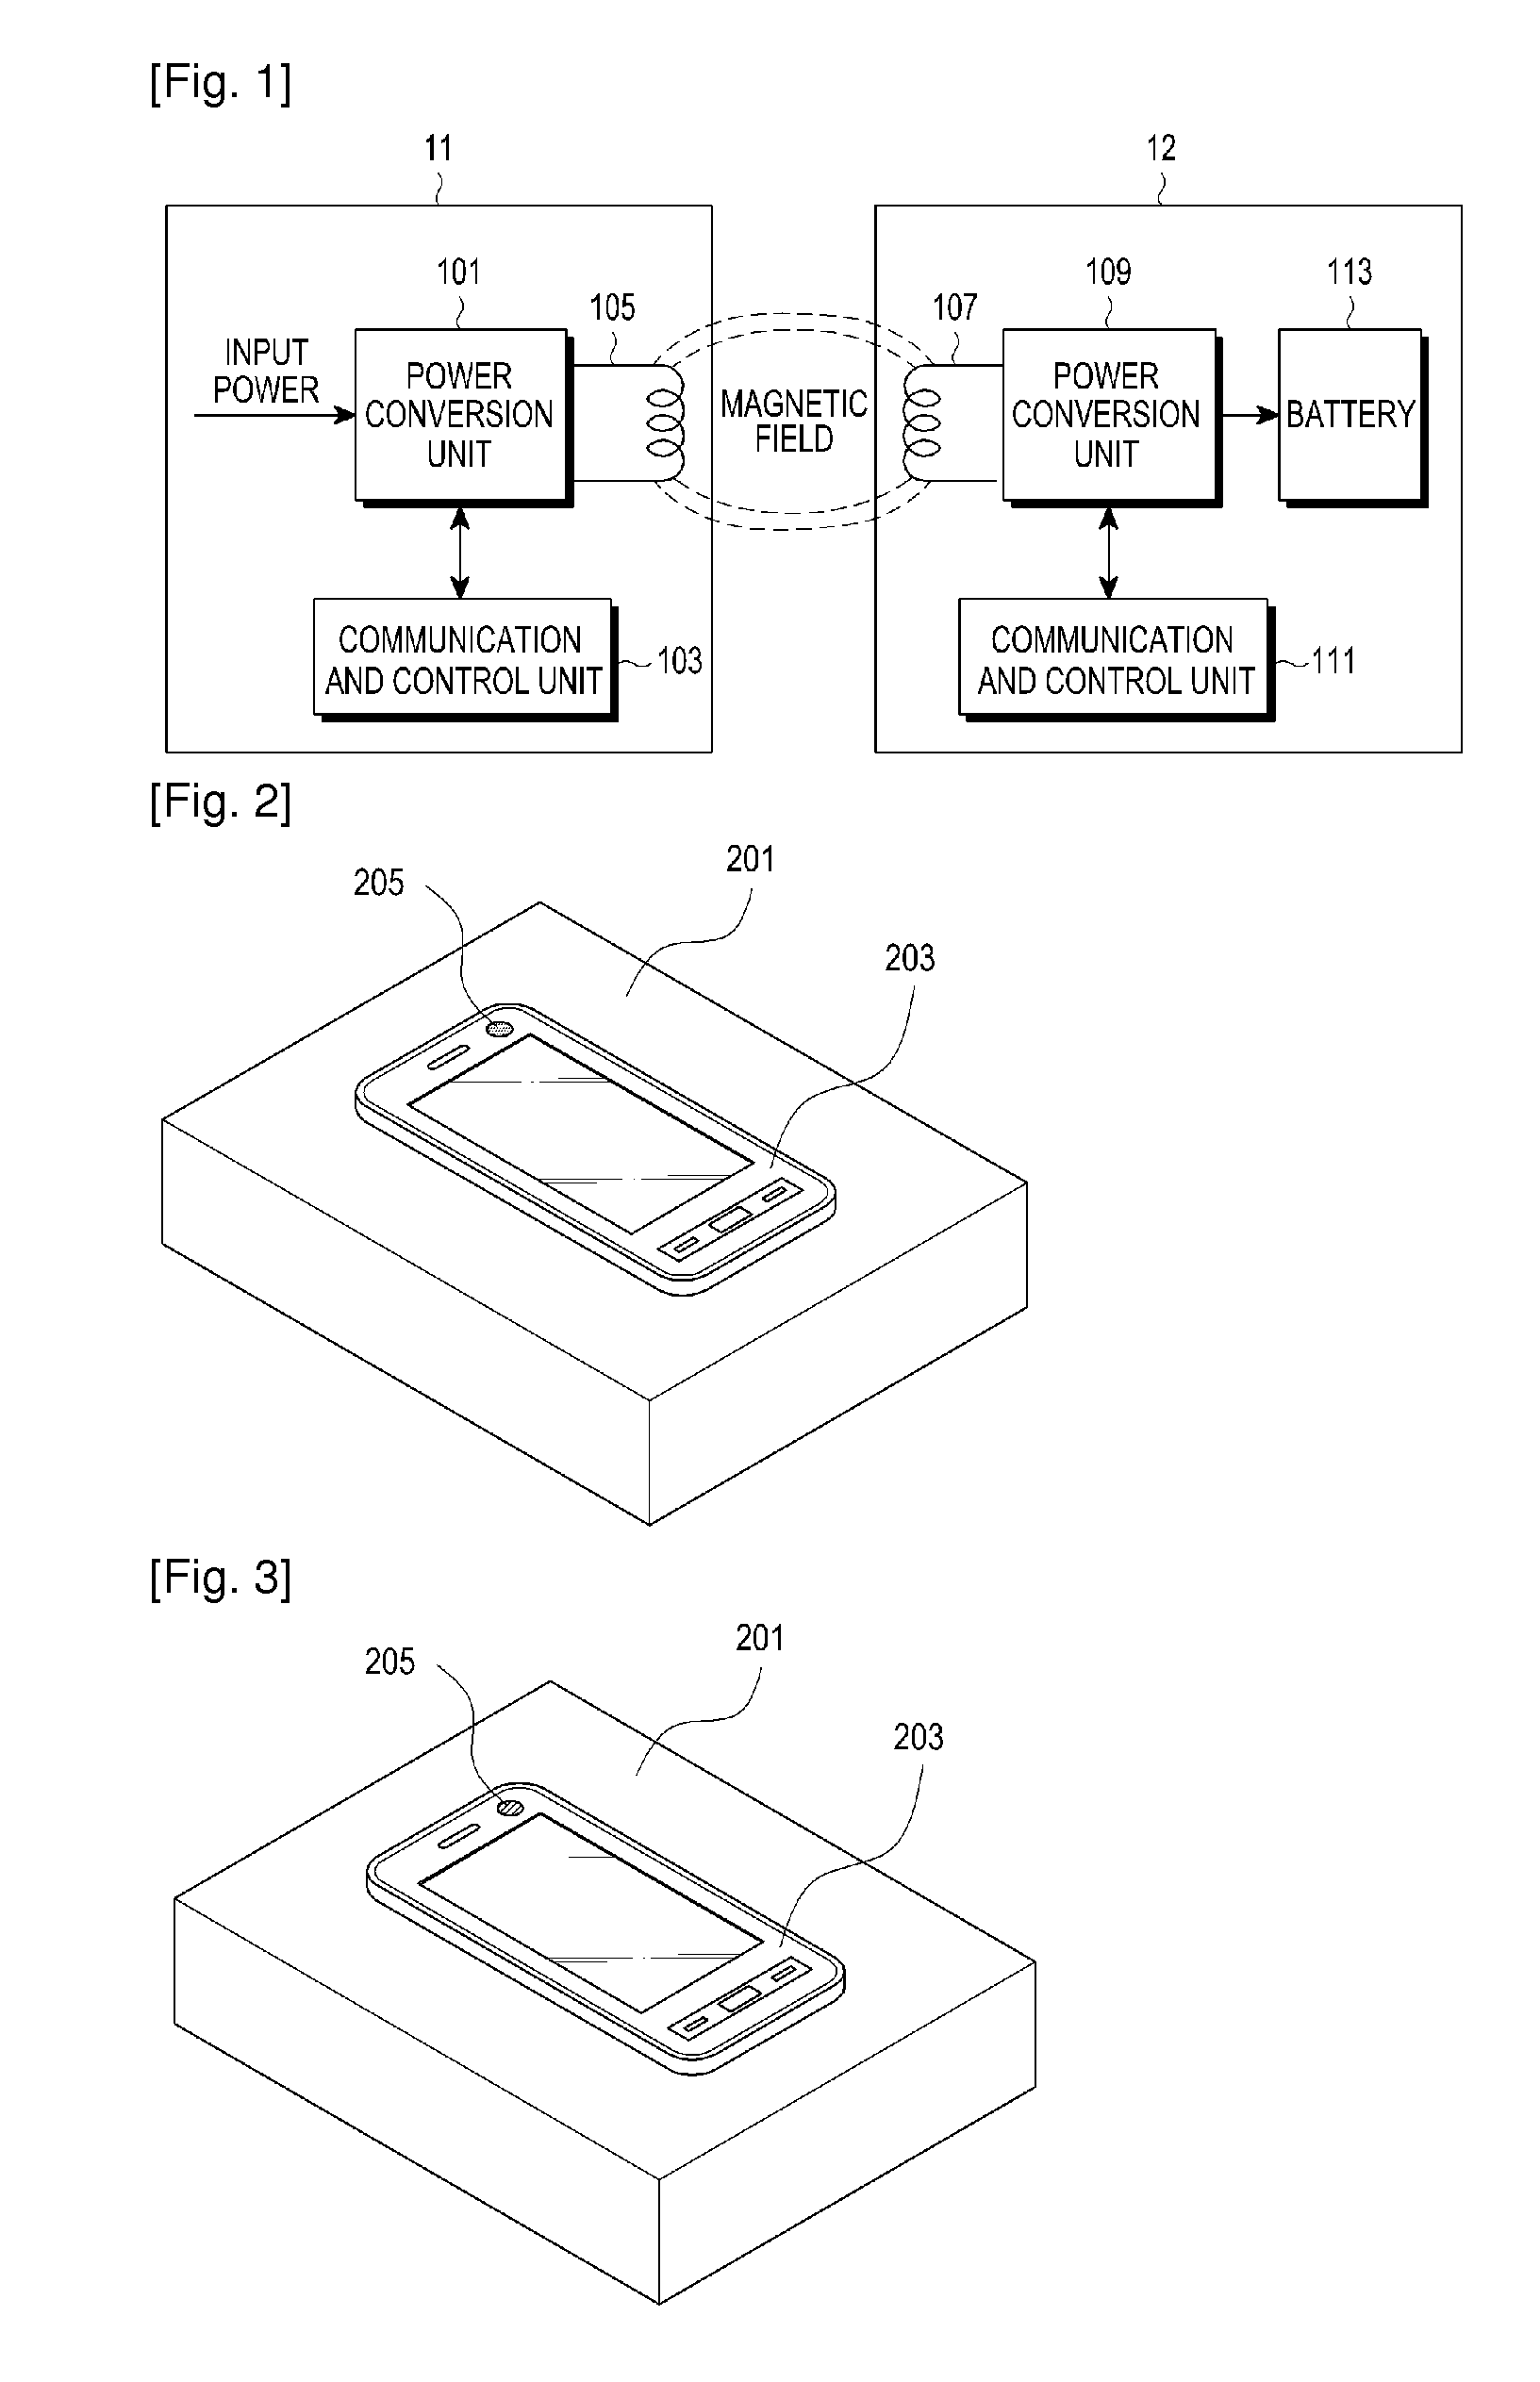 Apparatus and method for displaying strength of power and expected charge completion time during wireless charging